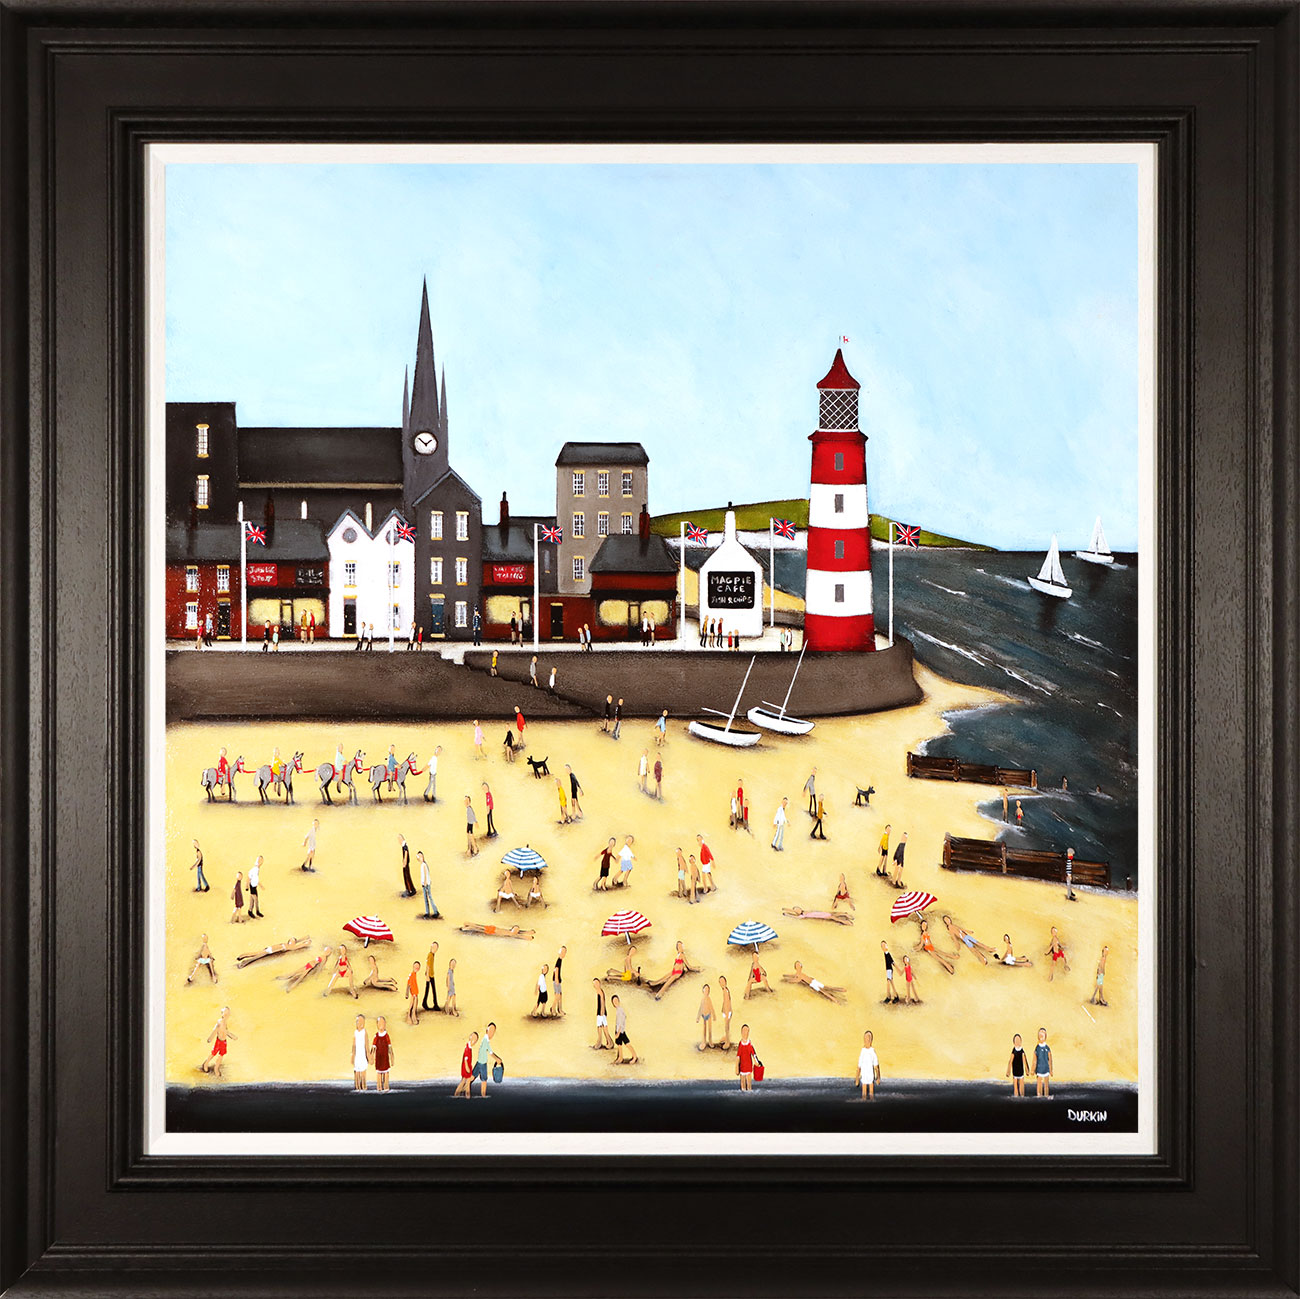 Sean Durkin, Original oil painting on panel, A Day at the Seaside. Click to enlarge